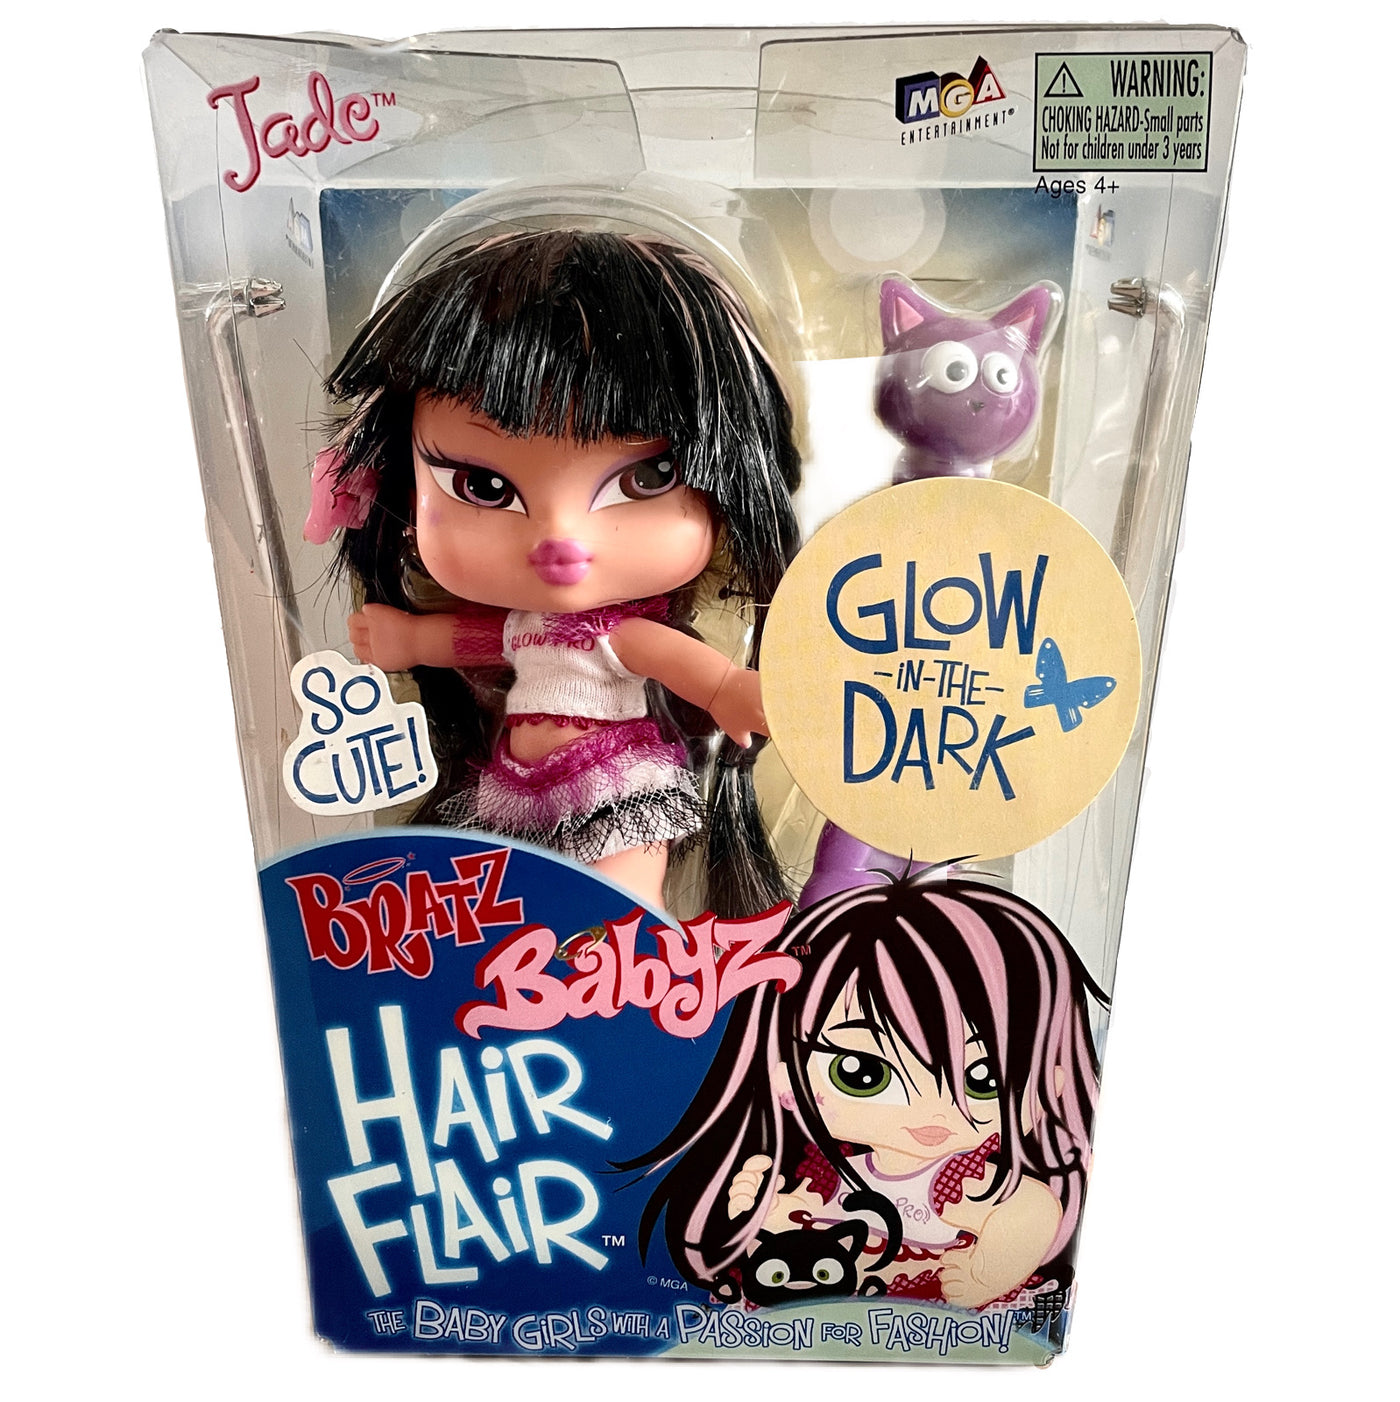 Bratz Babyz Cloe Collectible Fashion Doll with Real Fashions and